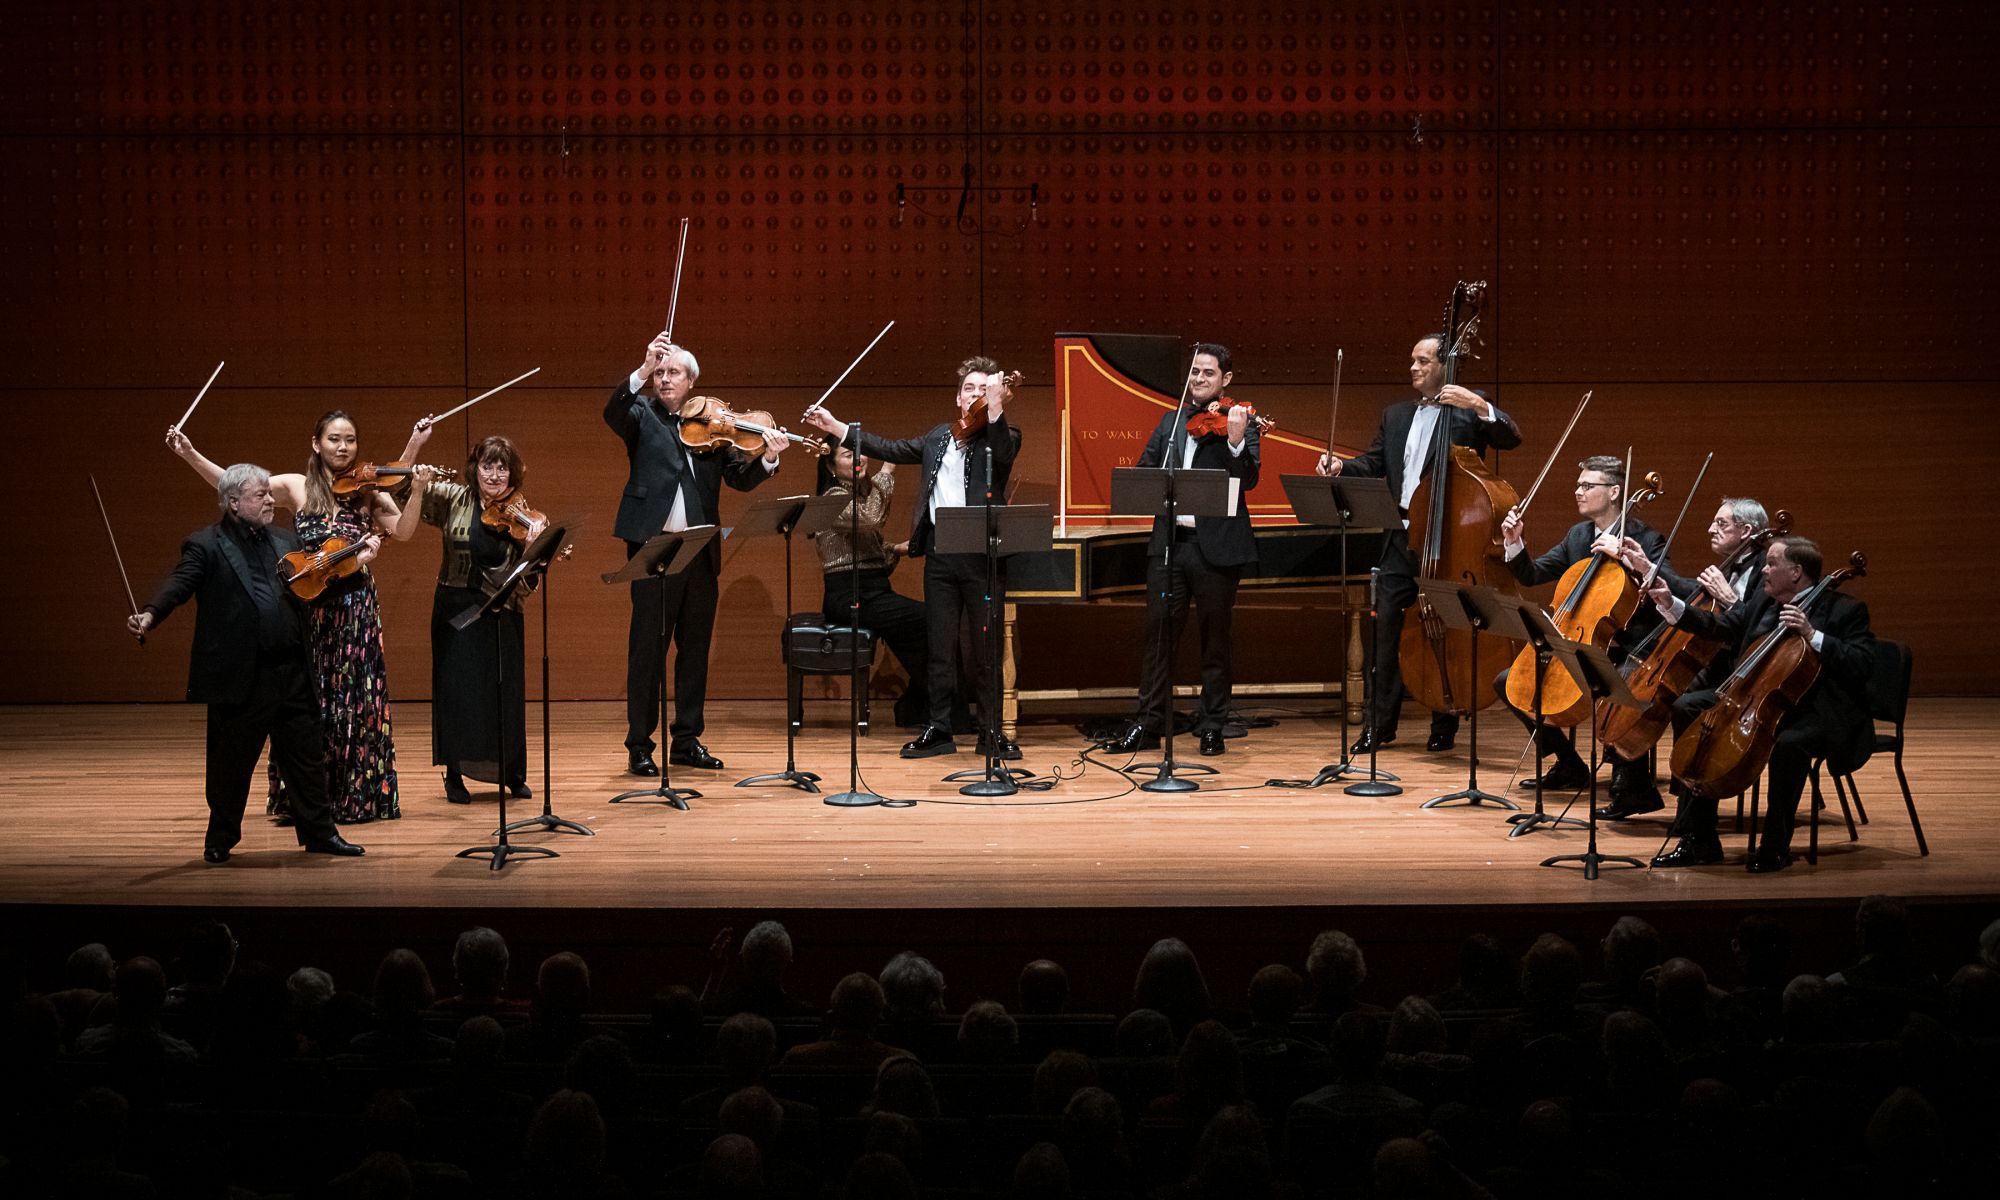 An ensemble of musicians on stage lifting their bow's as if they are finished playing.